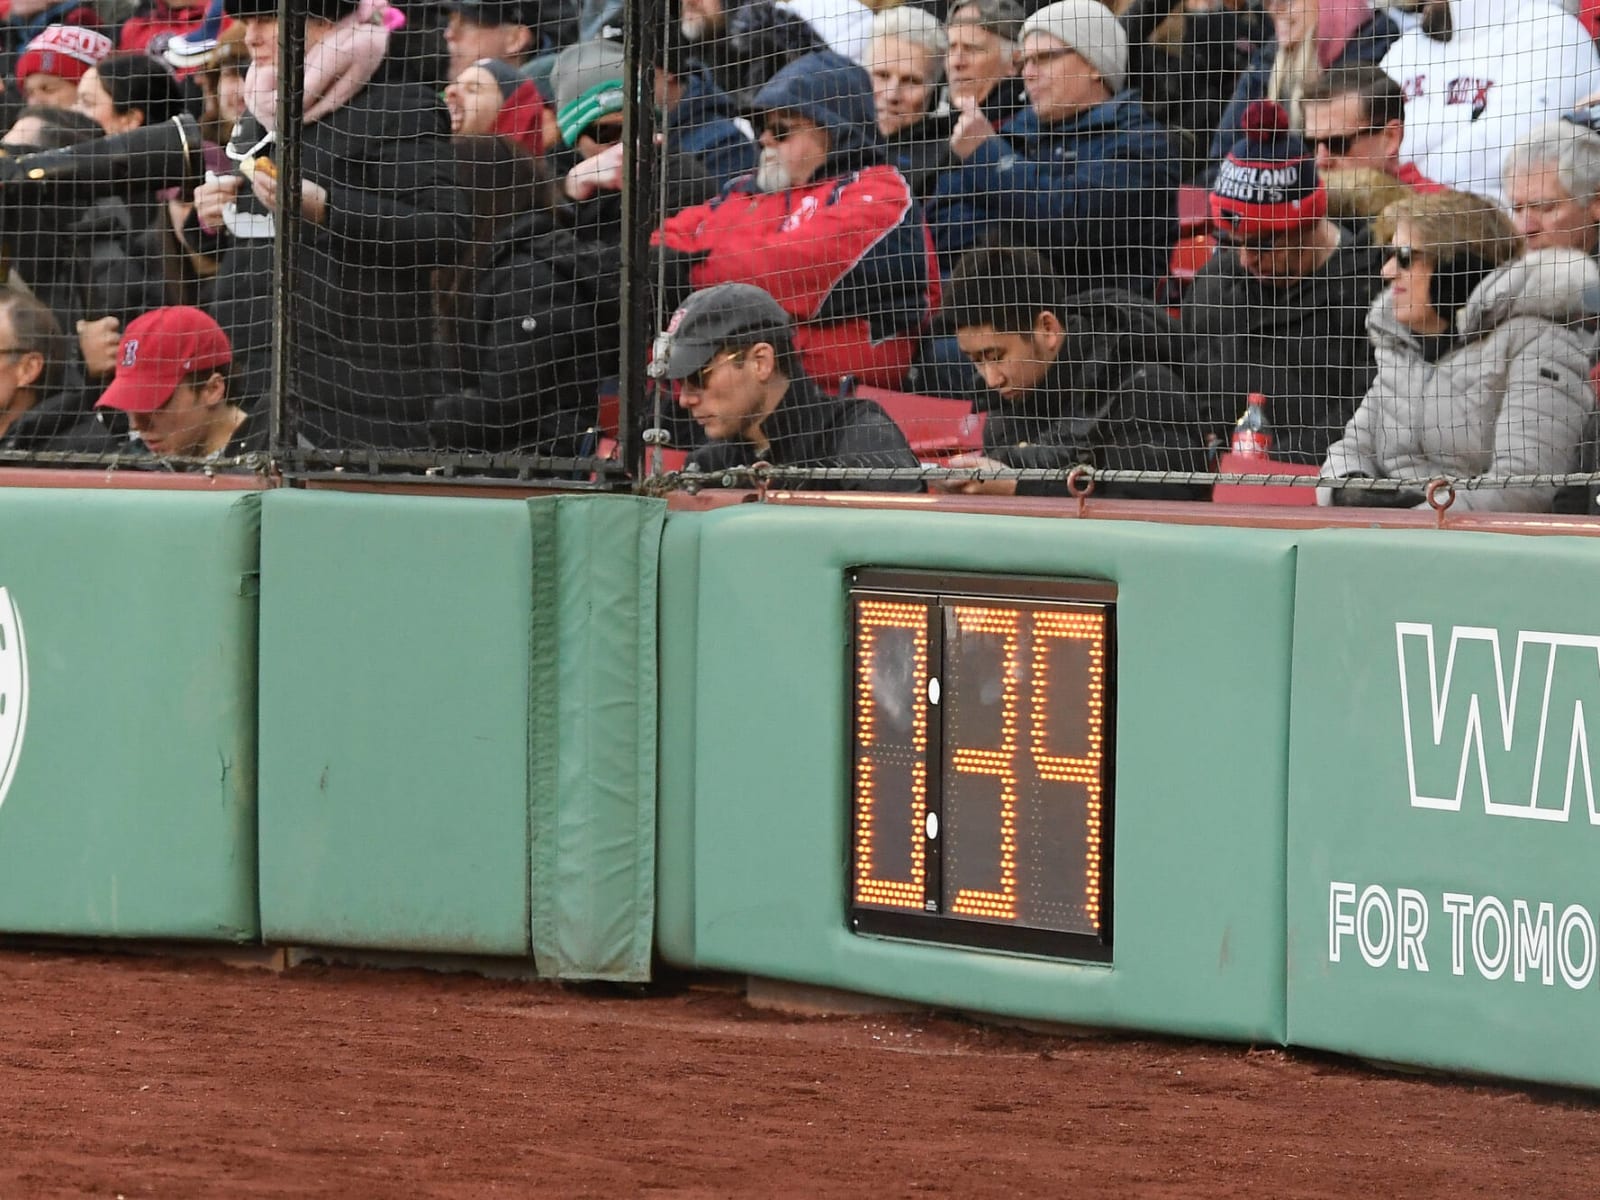 Fenway Park redesigned for safety precautions